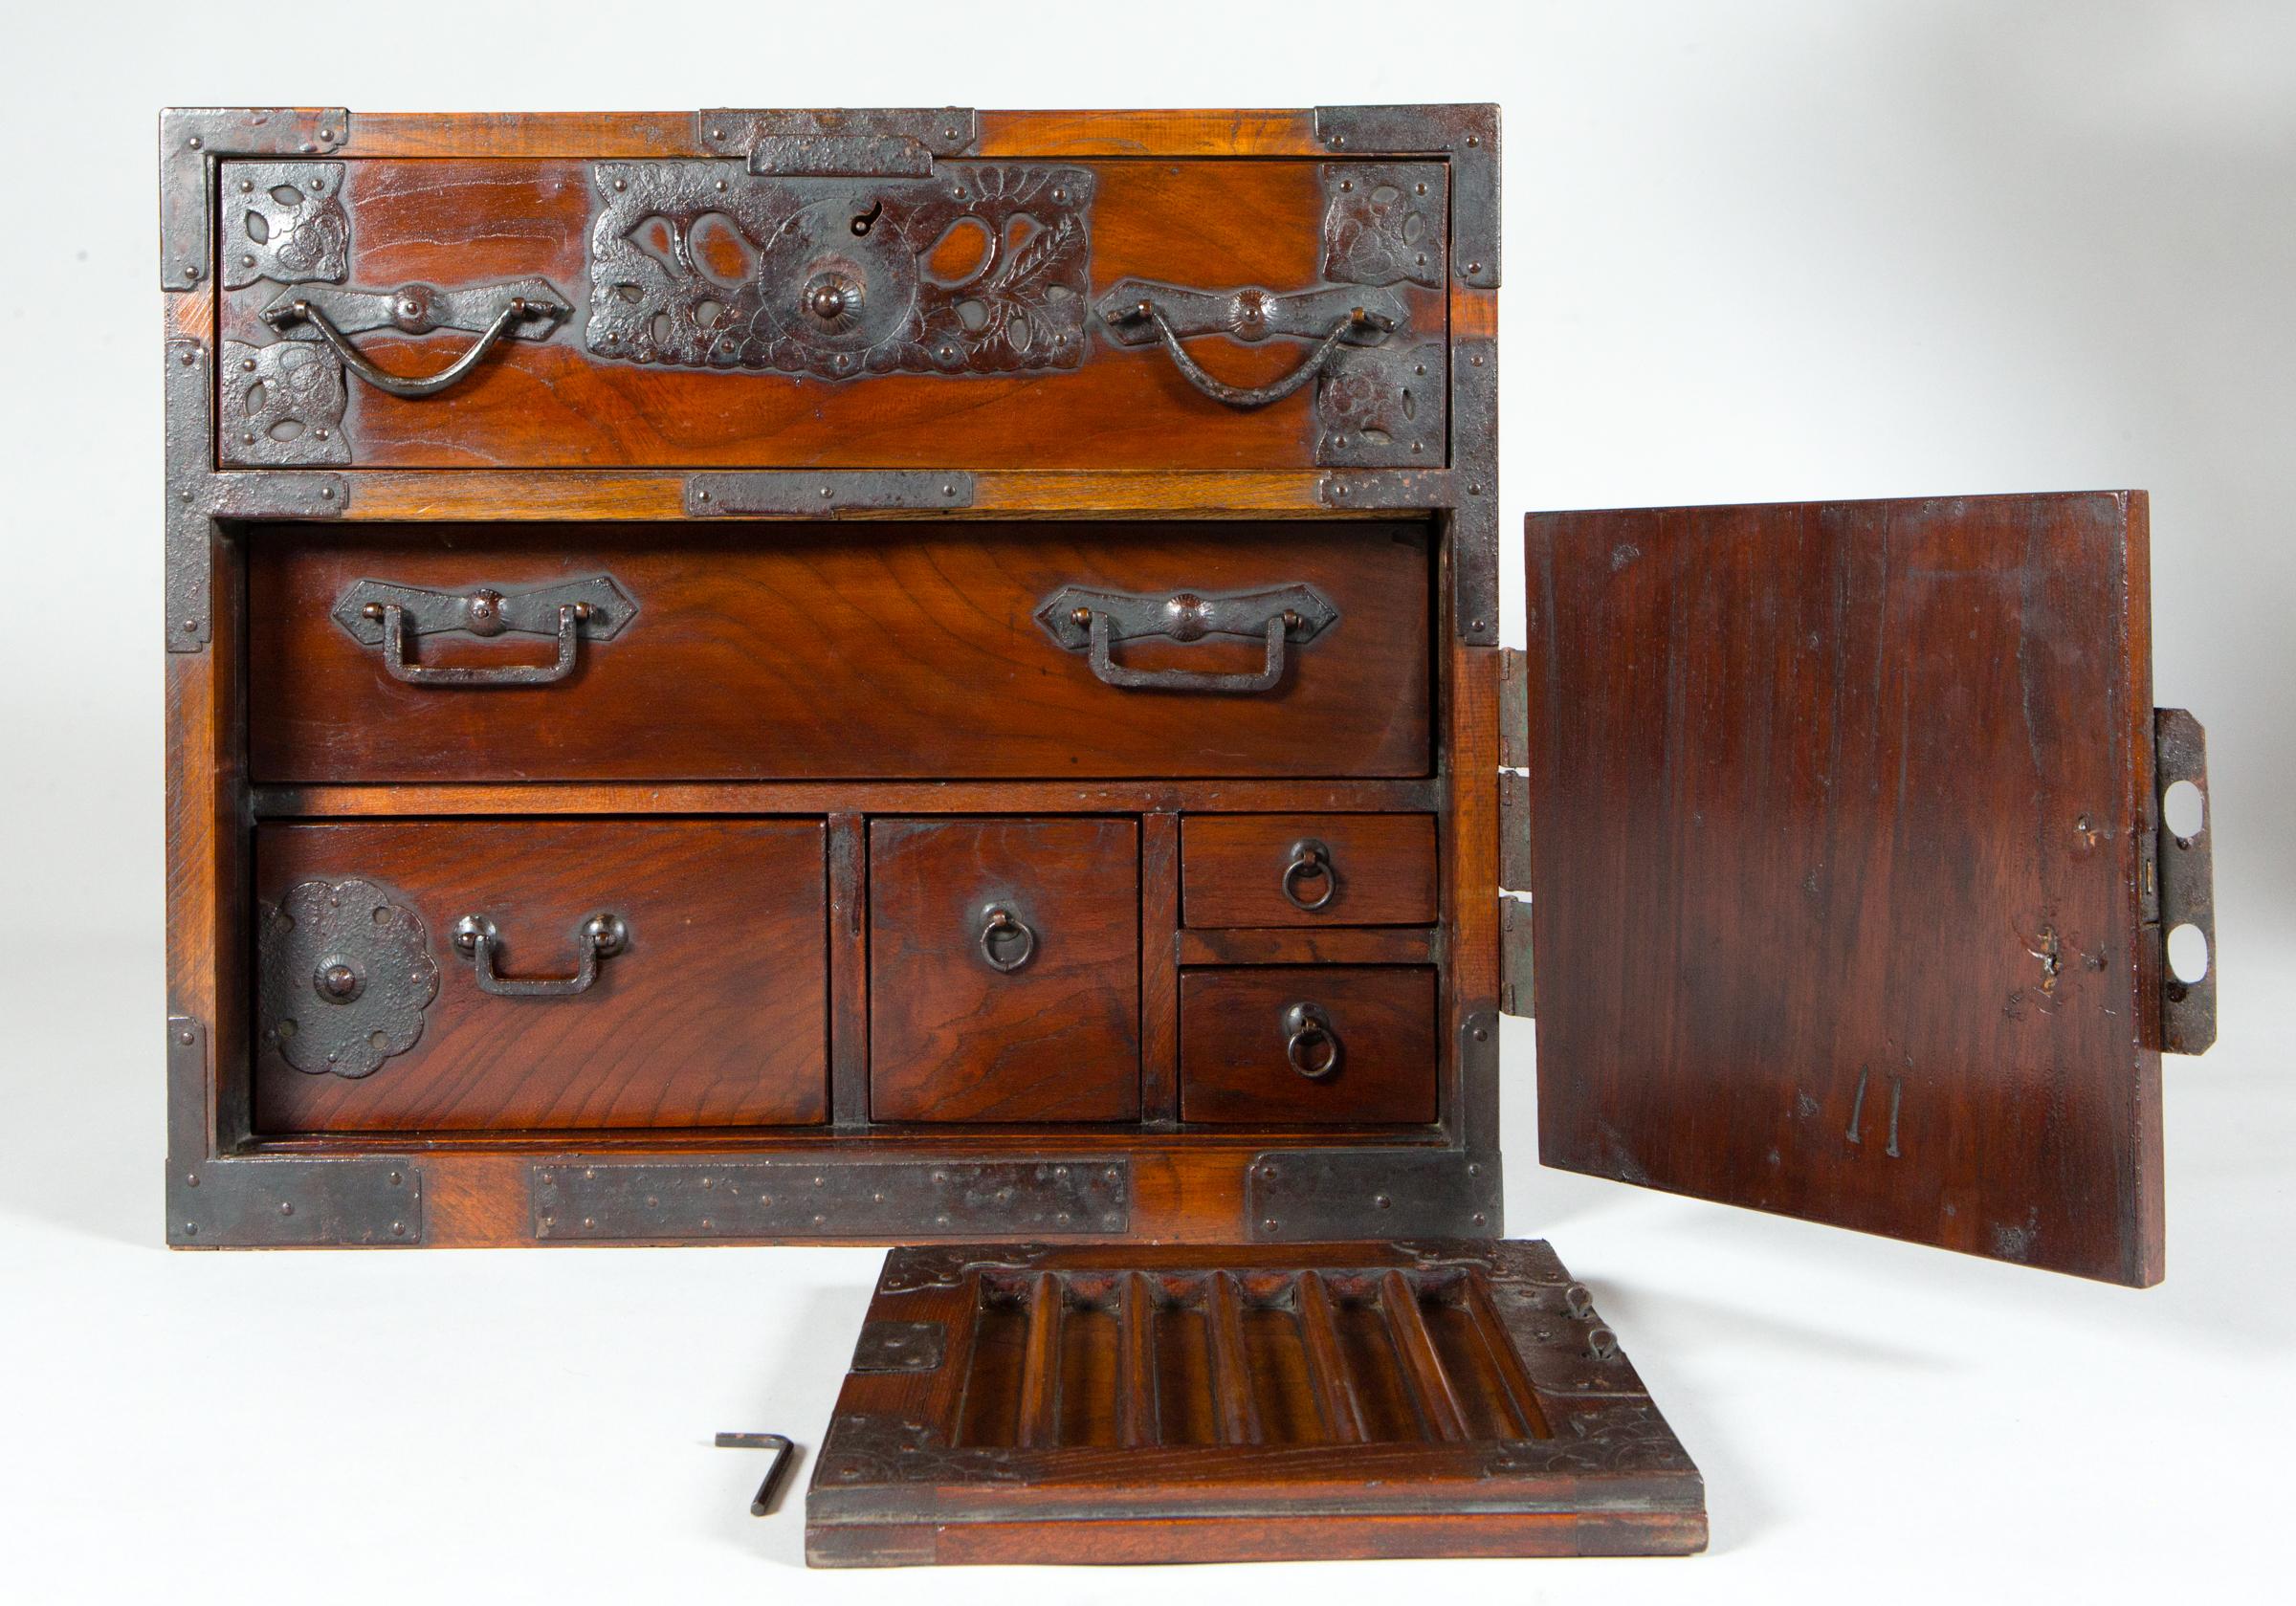 Meiji period (1868-1912) tansu with one drawer on top, a sliding door to reveal 5 more drawers underneath, and 2 locks. Made of keyaki wood, a precious wood in Japan.